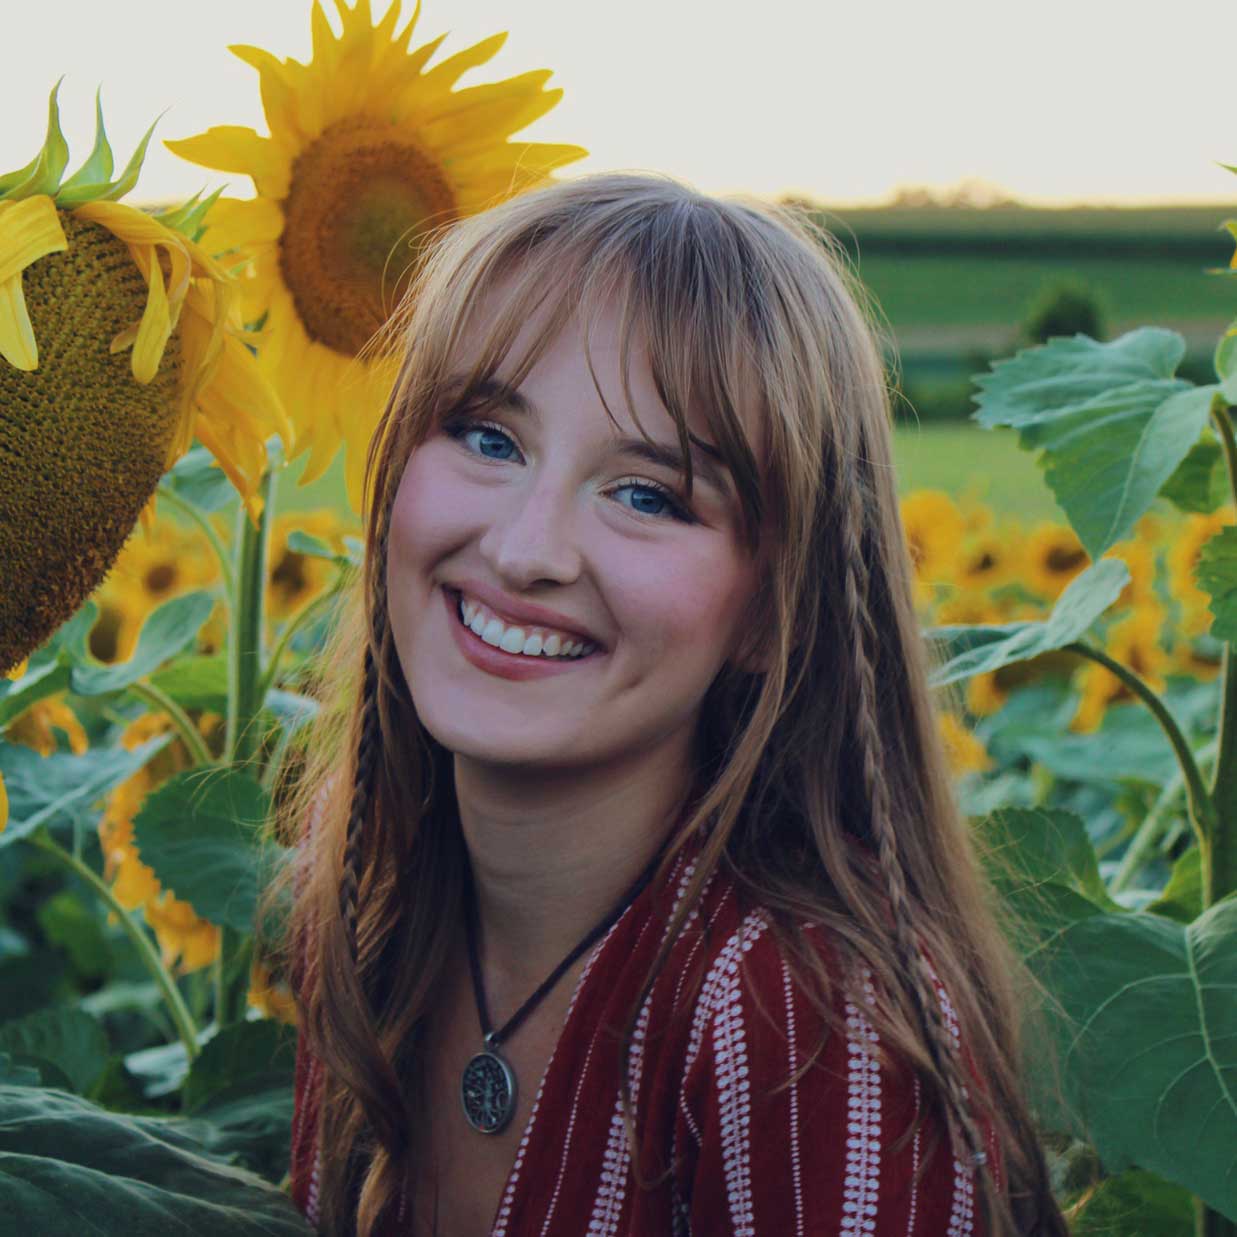 A photo of the 3rd place winner, Isabelle Anderson. She is smiling in a sunflower field at sunset.